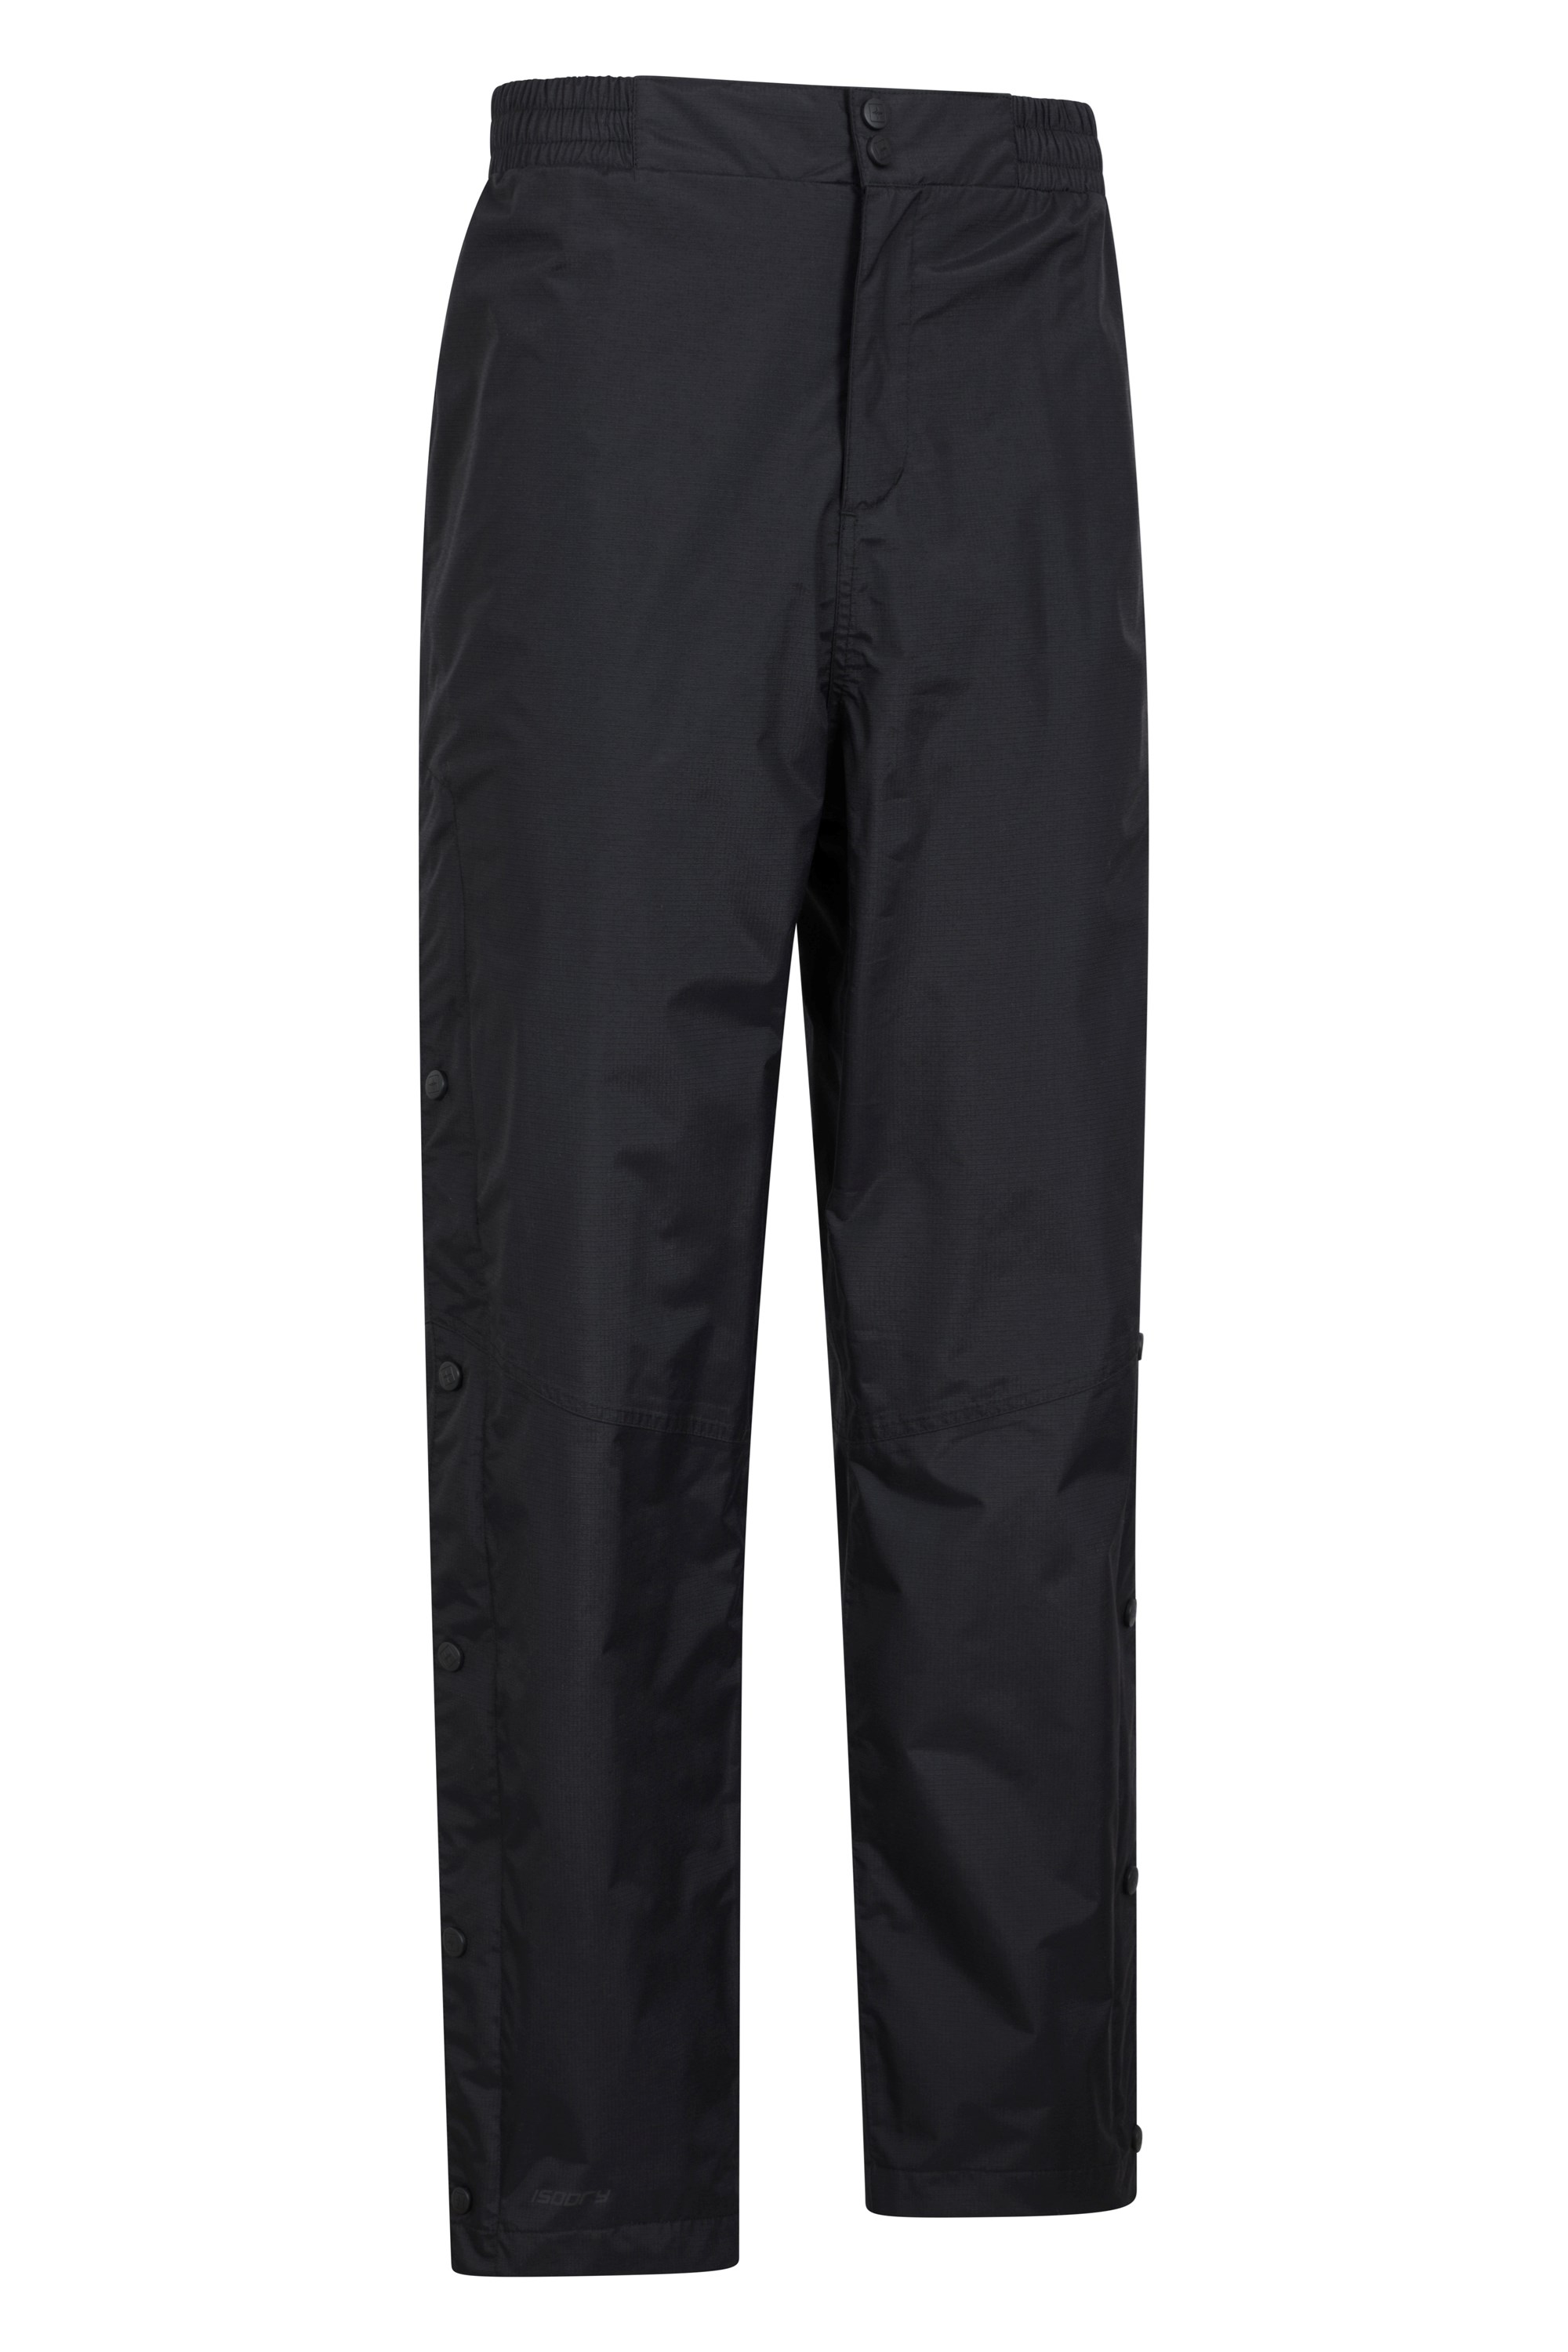 Men's Waterproof Packable Trousers, Overtrousers and Pants for Walking –  Montane - UK